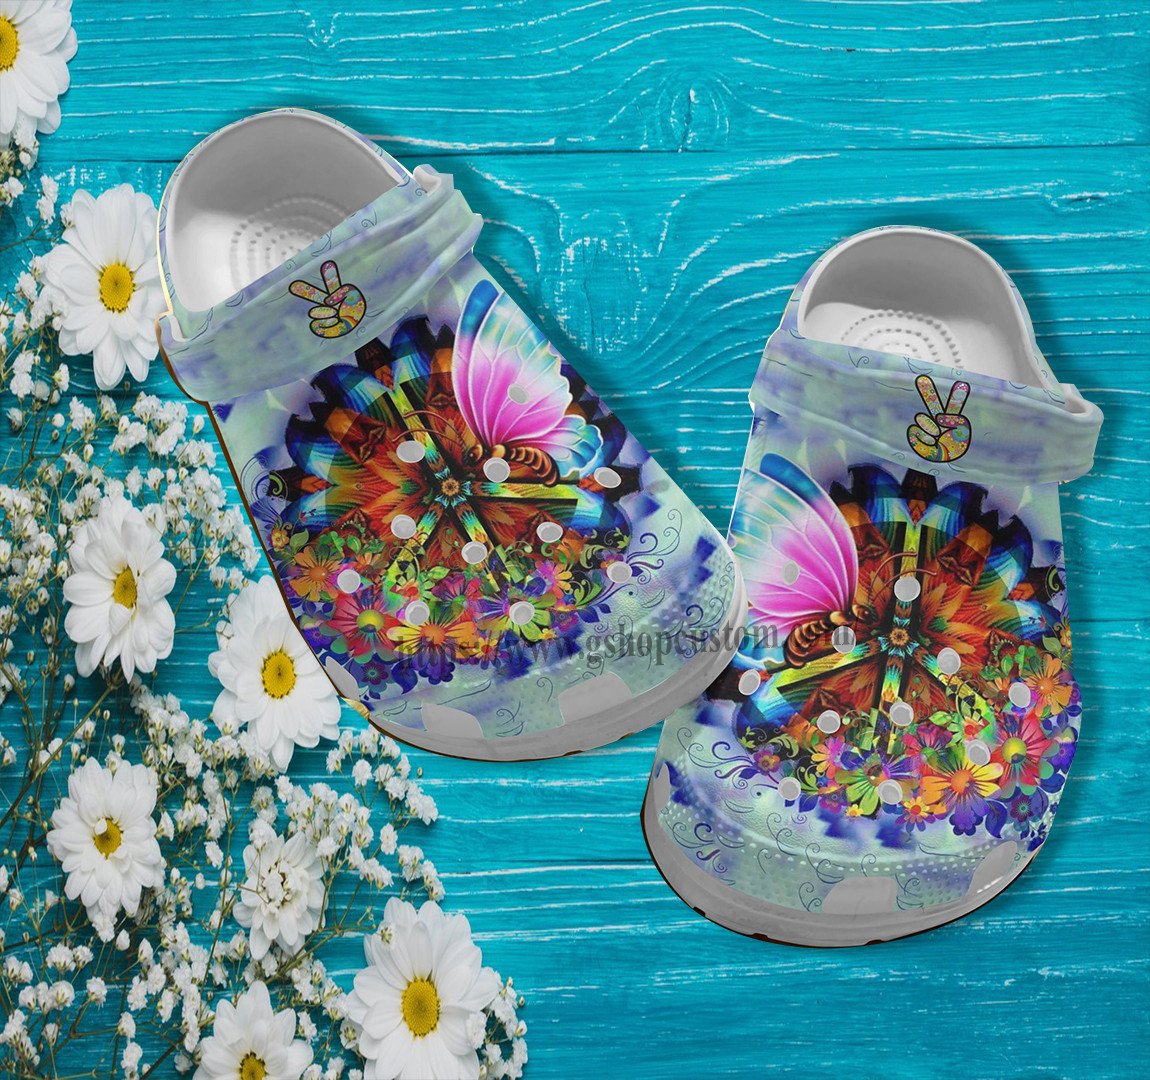 Butterfly Peace Hippie Trippy Croc Shoes Gift Women- Peace Flower Butterfly Shoes Croc Clogs- Cr-Ne0466